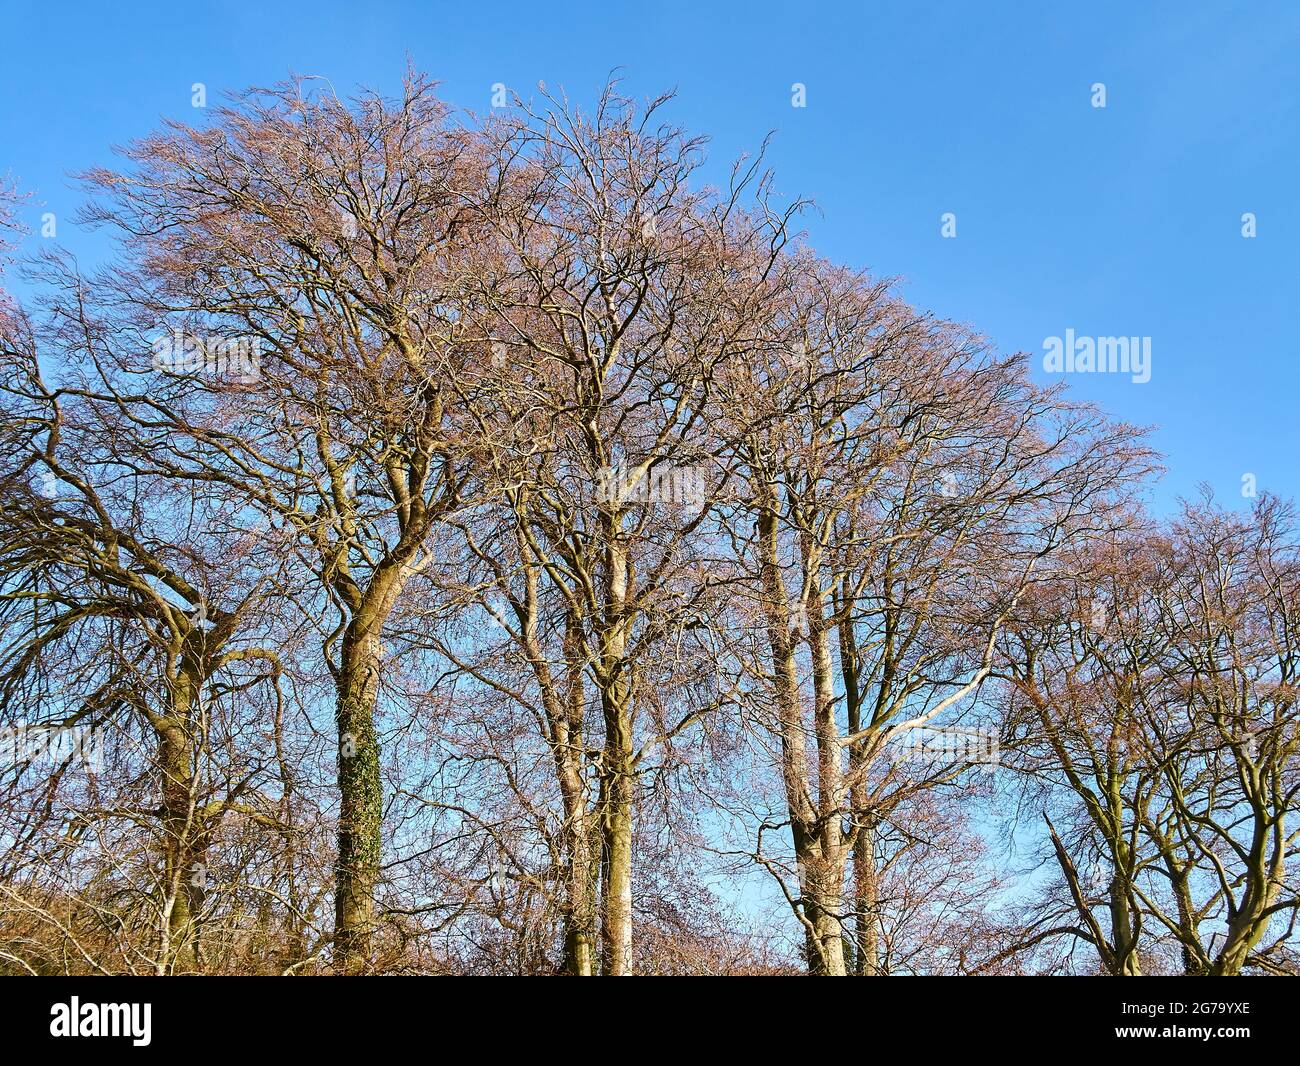 Winter woodland trees in British countryside Stock Photo